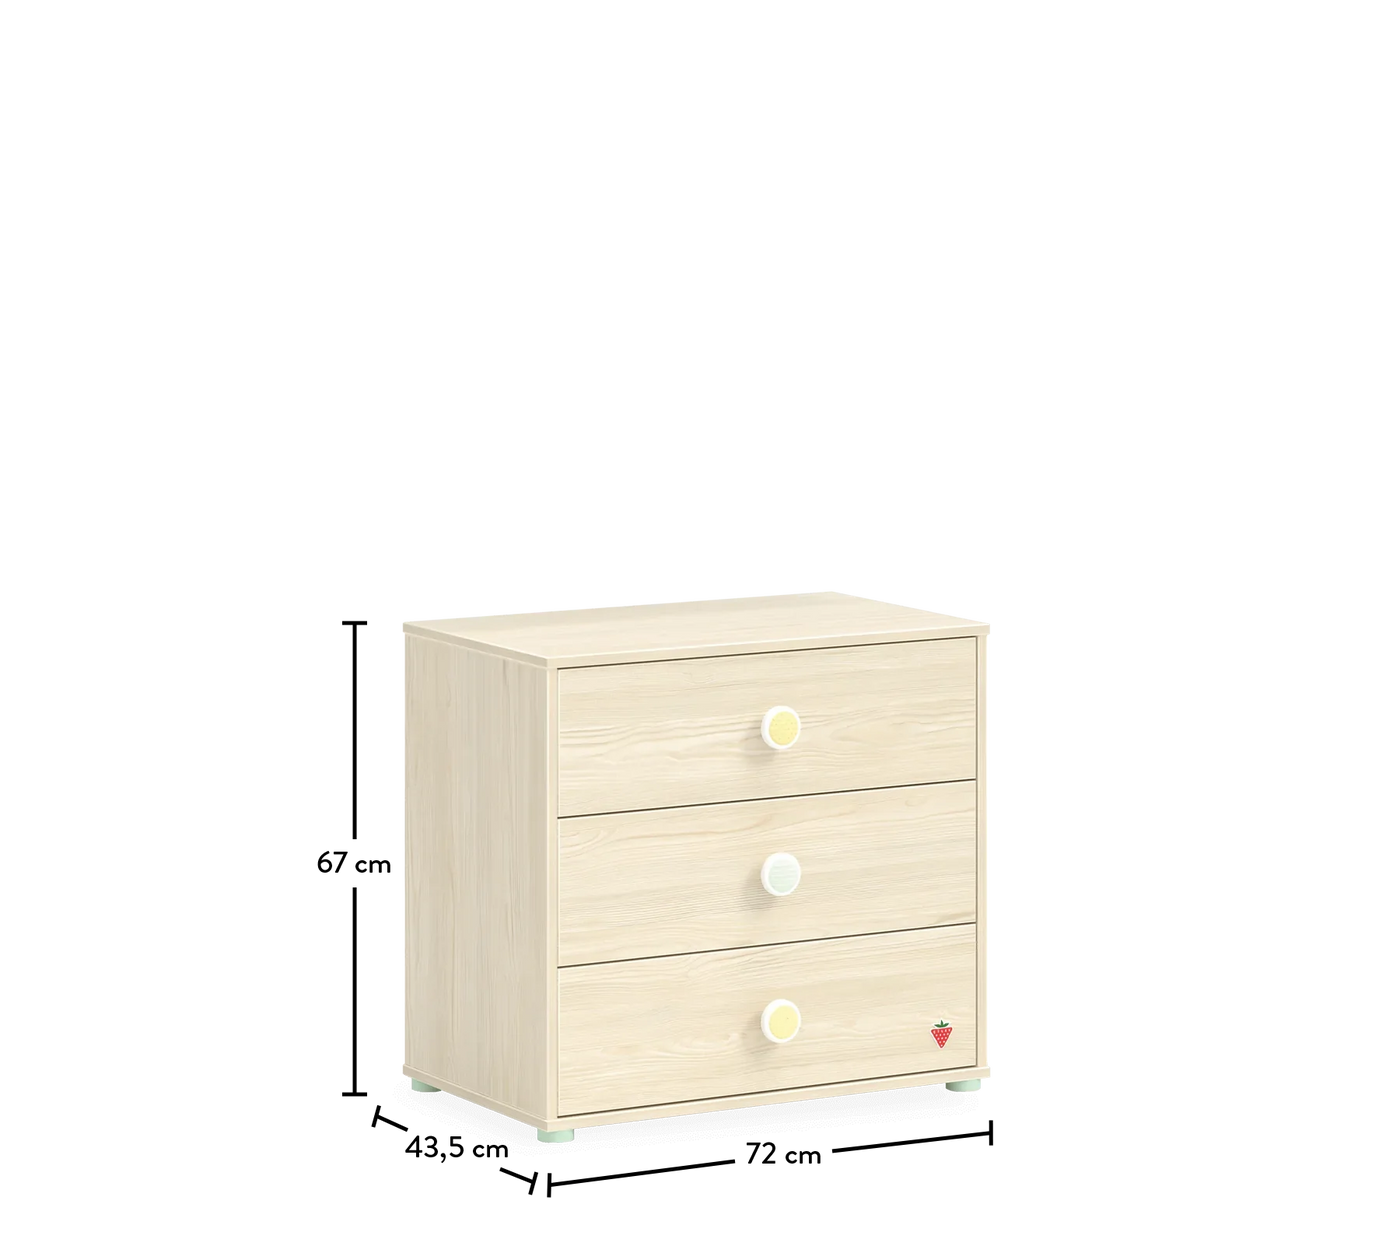 Montes Natural Small Size Dresser